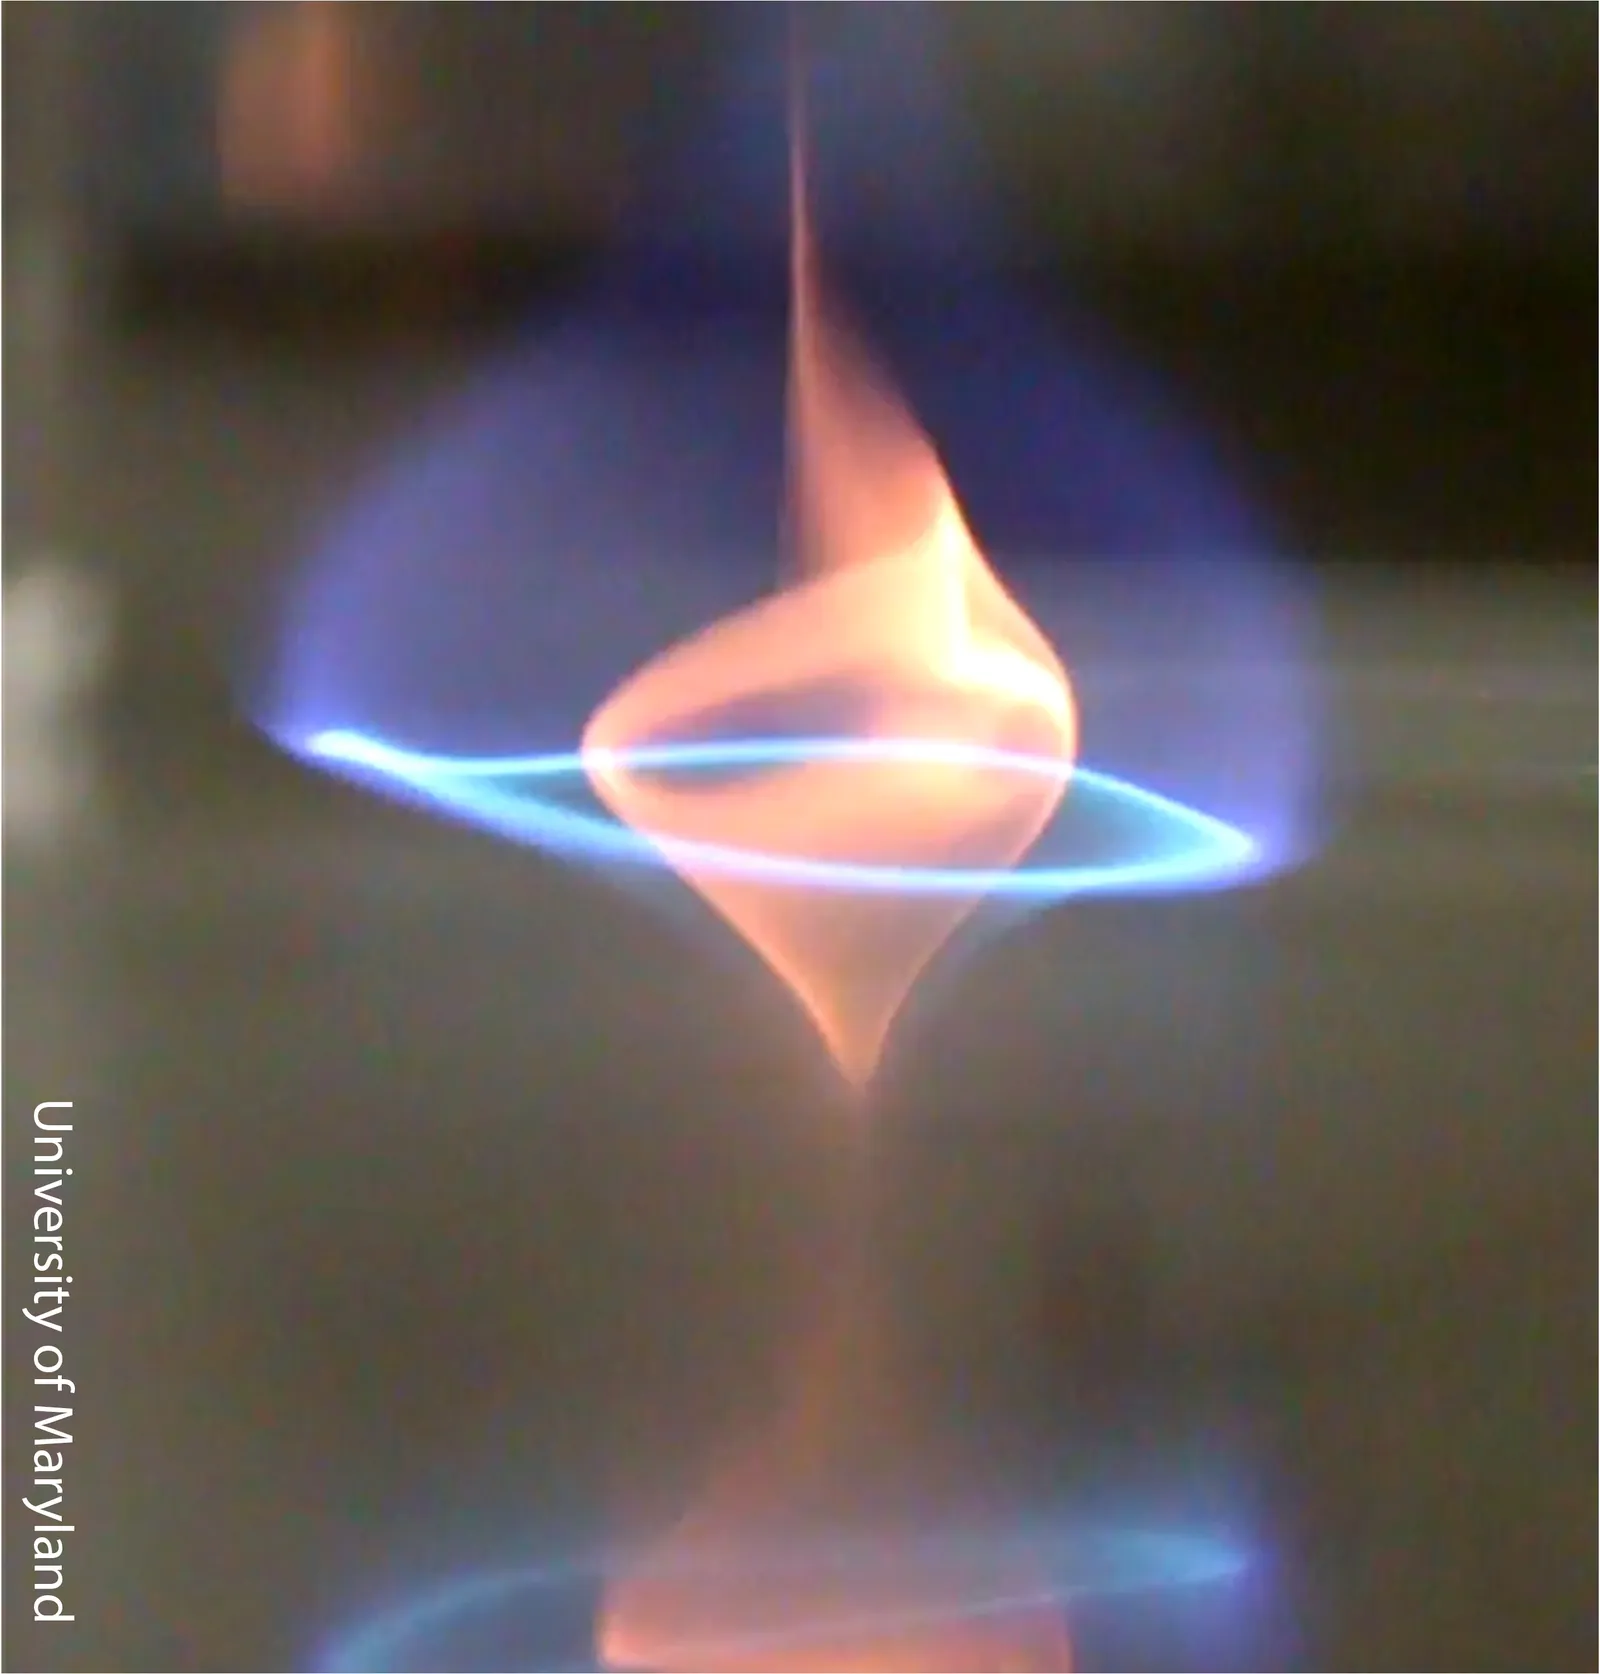 Researchers Discover the Blue Whirl, a New Type of Flame